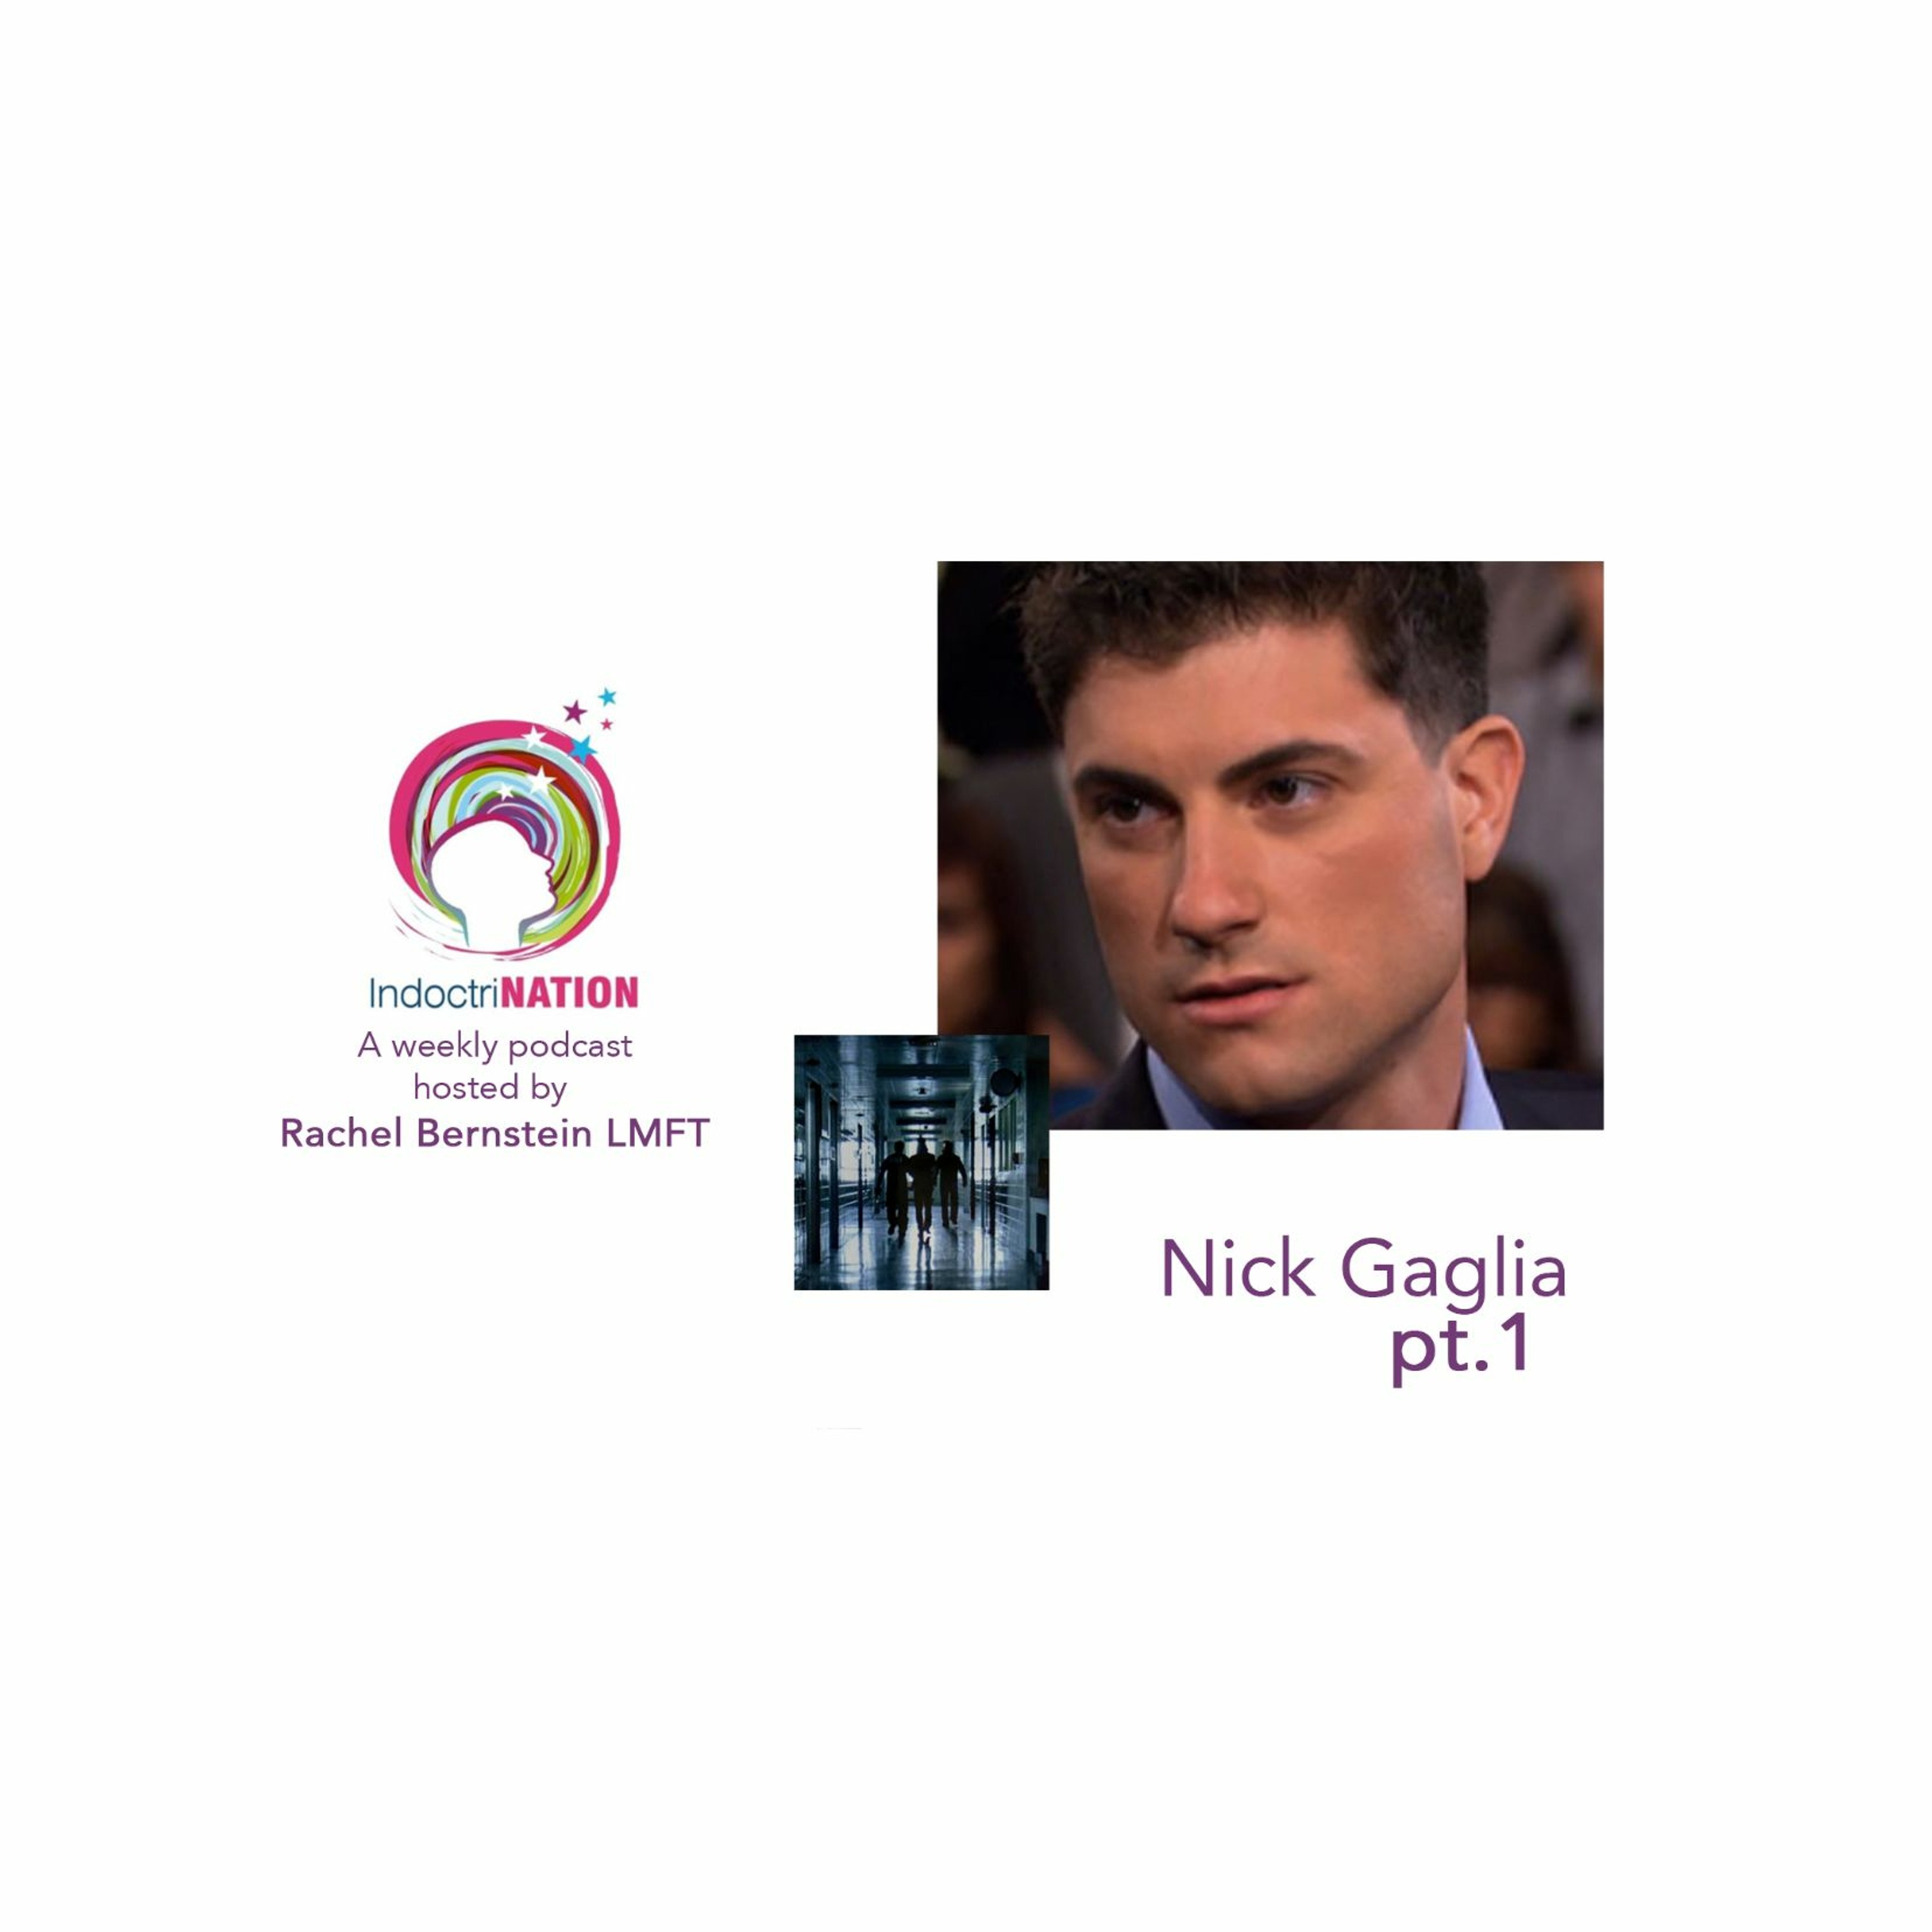 If You Leave, You're Going To Die w/ Nick Gaglia, treatment center survivor - S3E4pt1